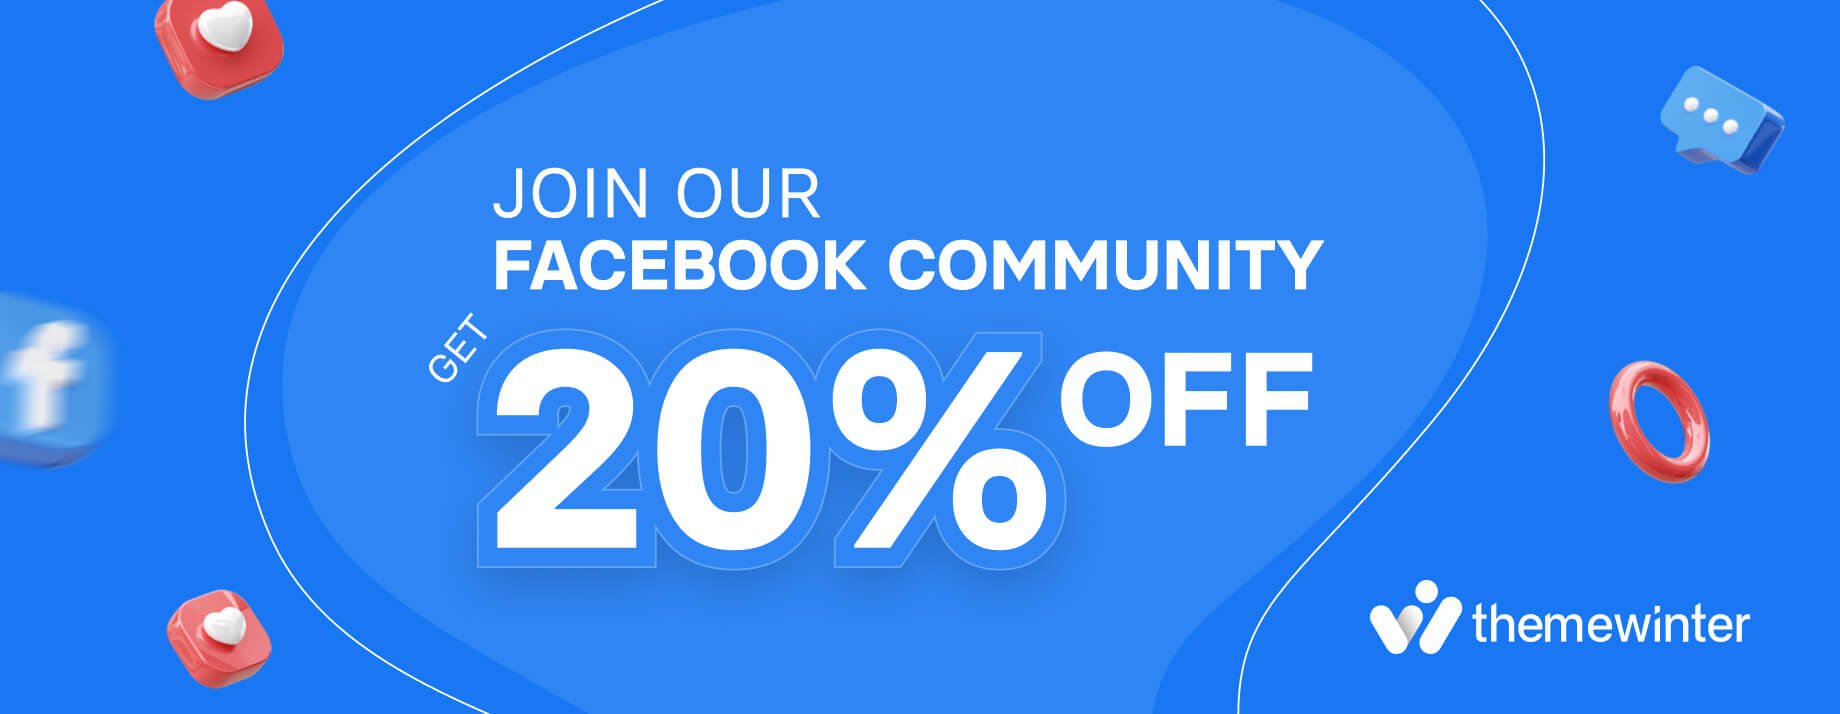 join themewinter fb community for 20% discount